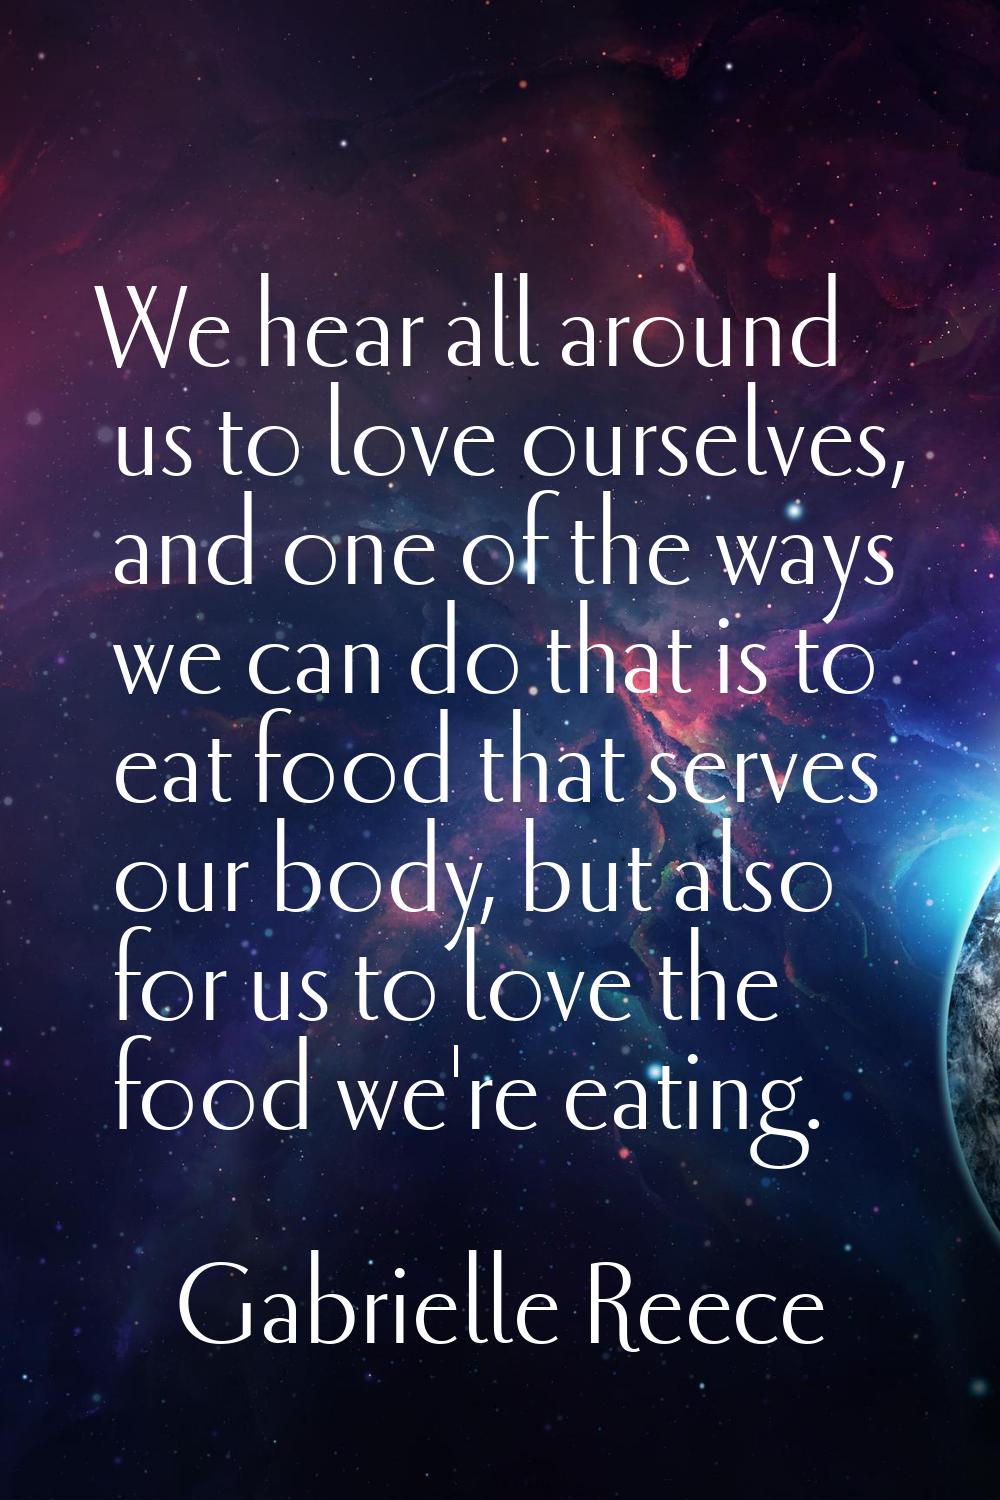 We hear all around us to love ourselves, and one of the ways we can do that is to eat food that ser